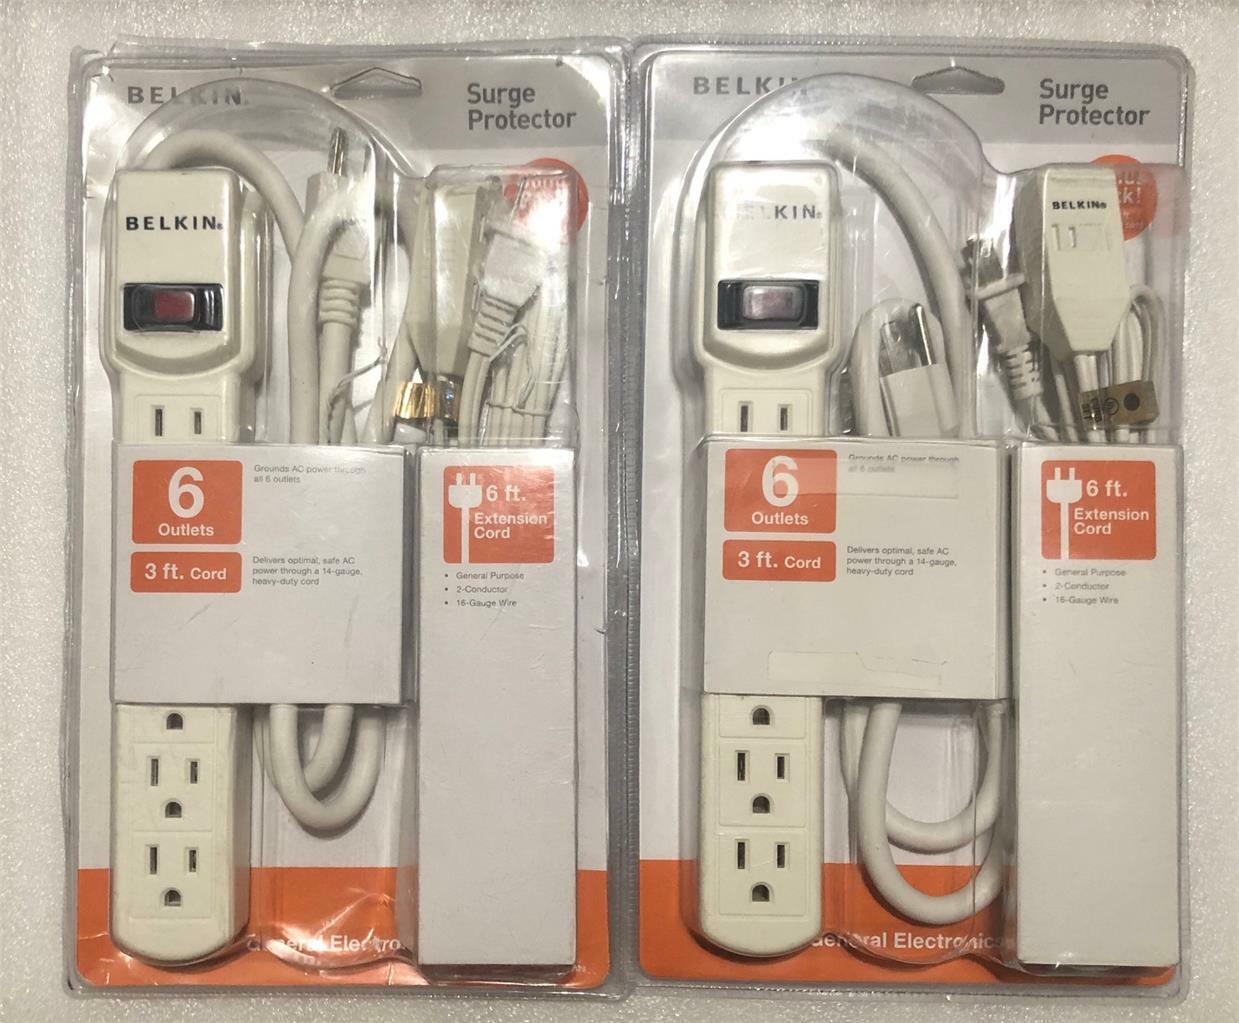 2 Packs Belkin Surge Protector 6 Outlet 3 ft Cord w/ Bonus 6 ft Extension Cord